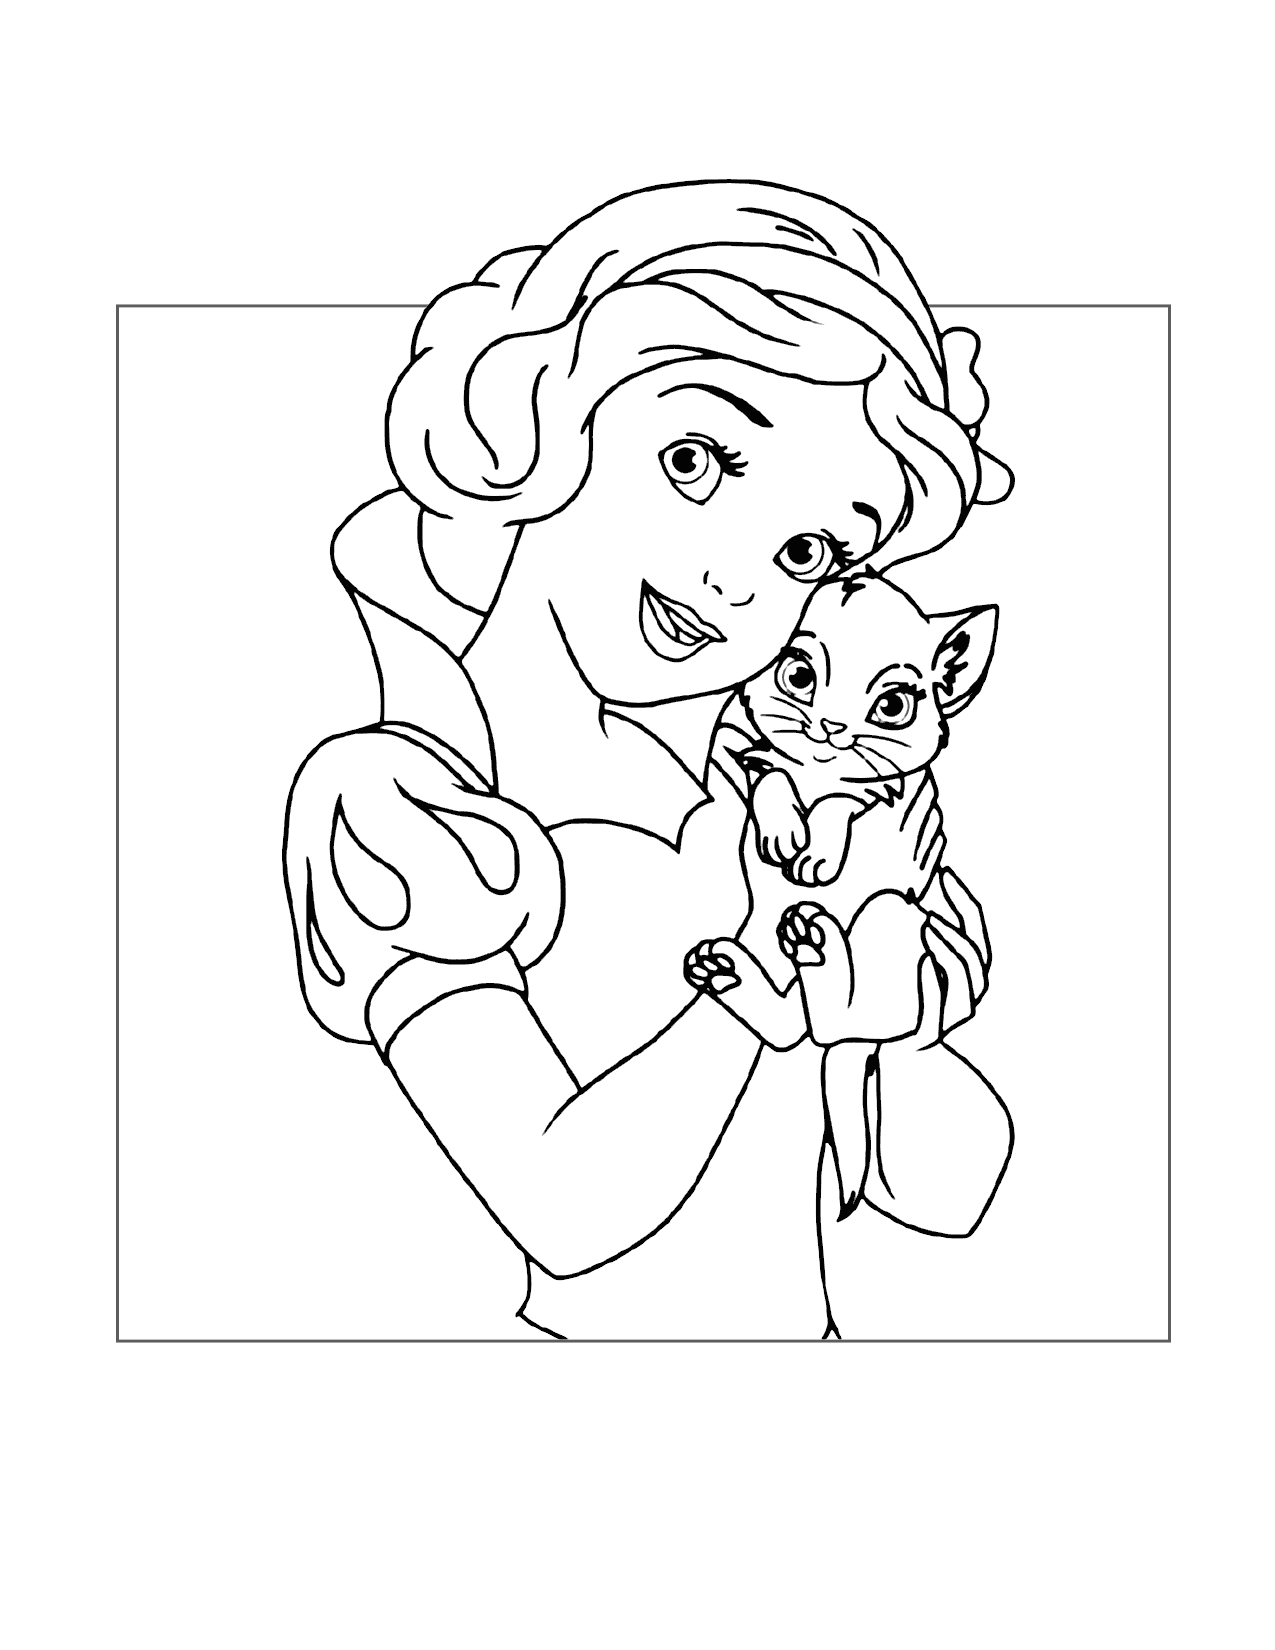 Snow White And A Kitten Coloring Page